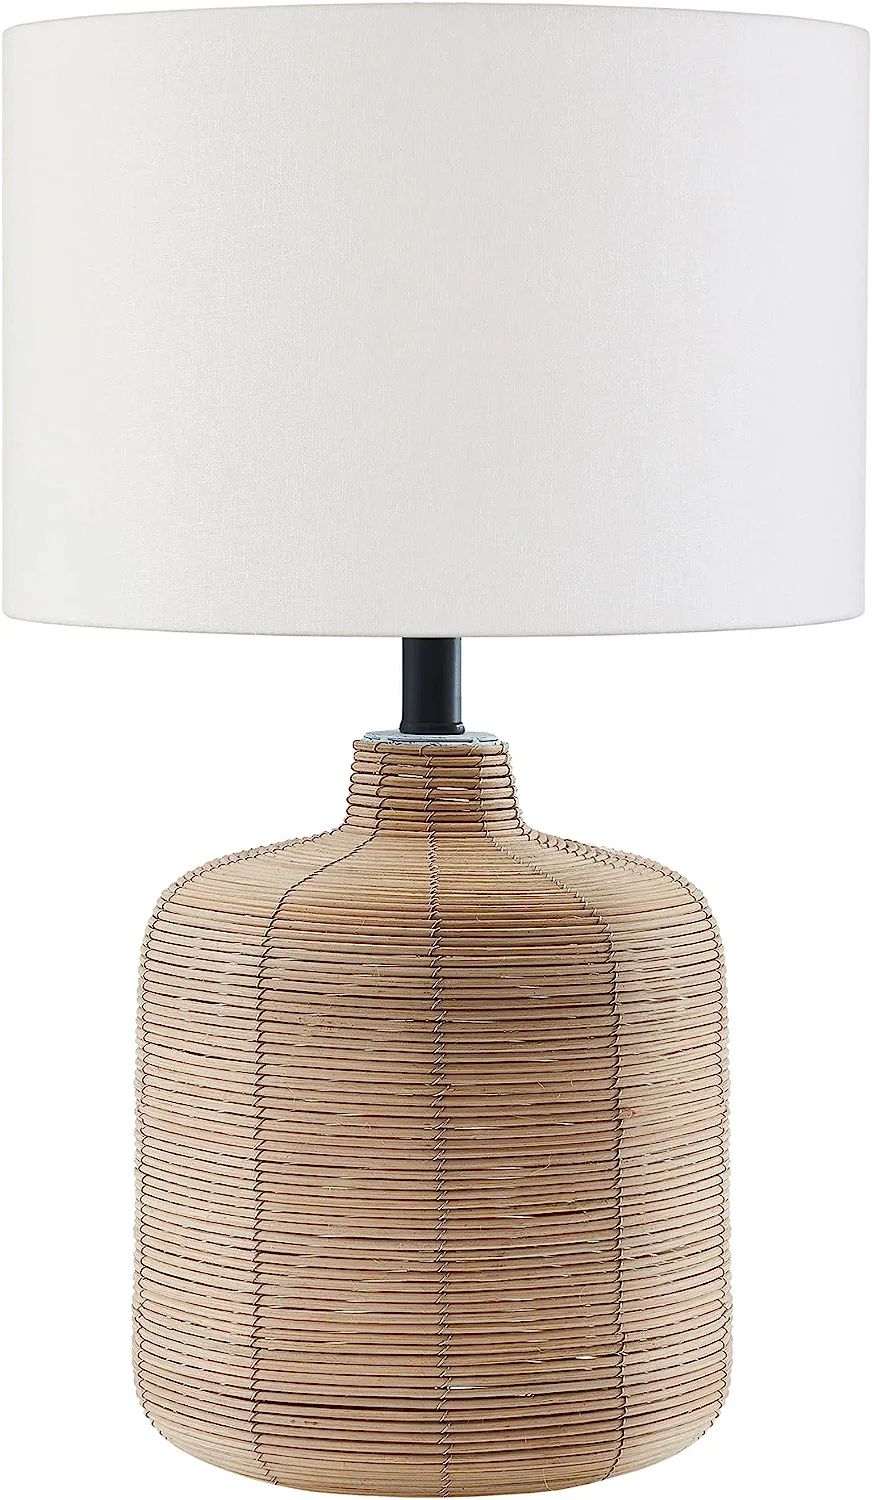 Jolina 20.5" Tall Petite/Rattan Table Lamp with Fabric Shade in Natural Rattan/Brass /White | Amazon (US)